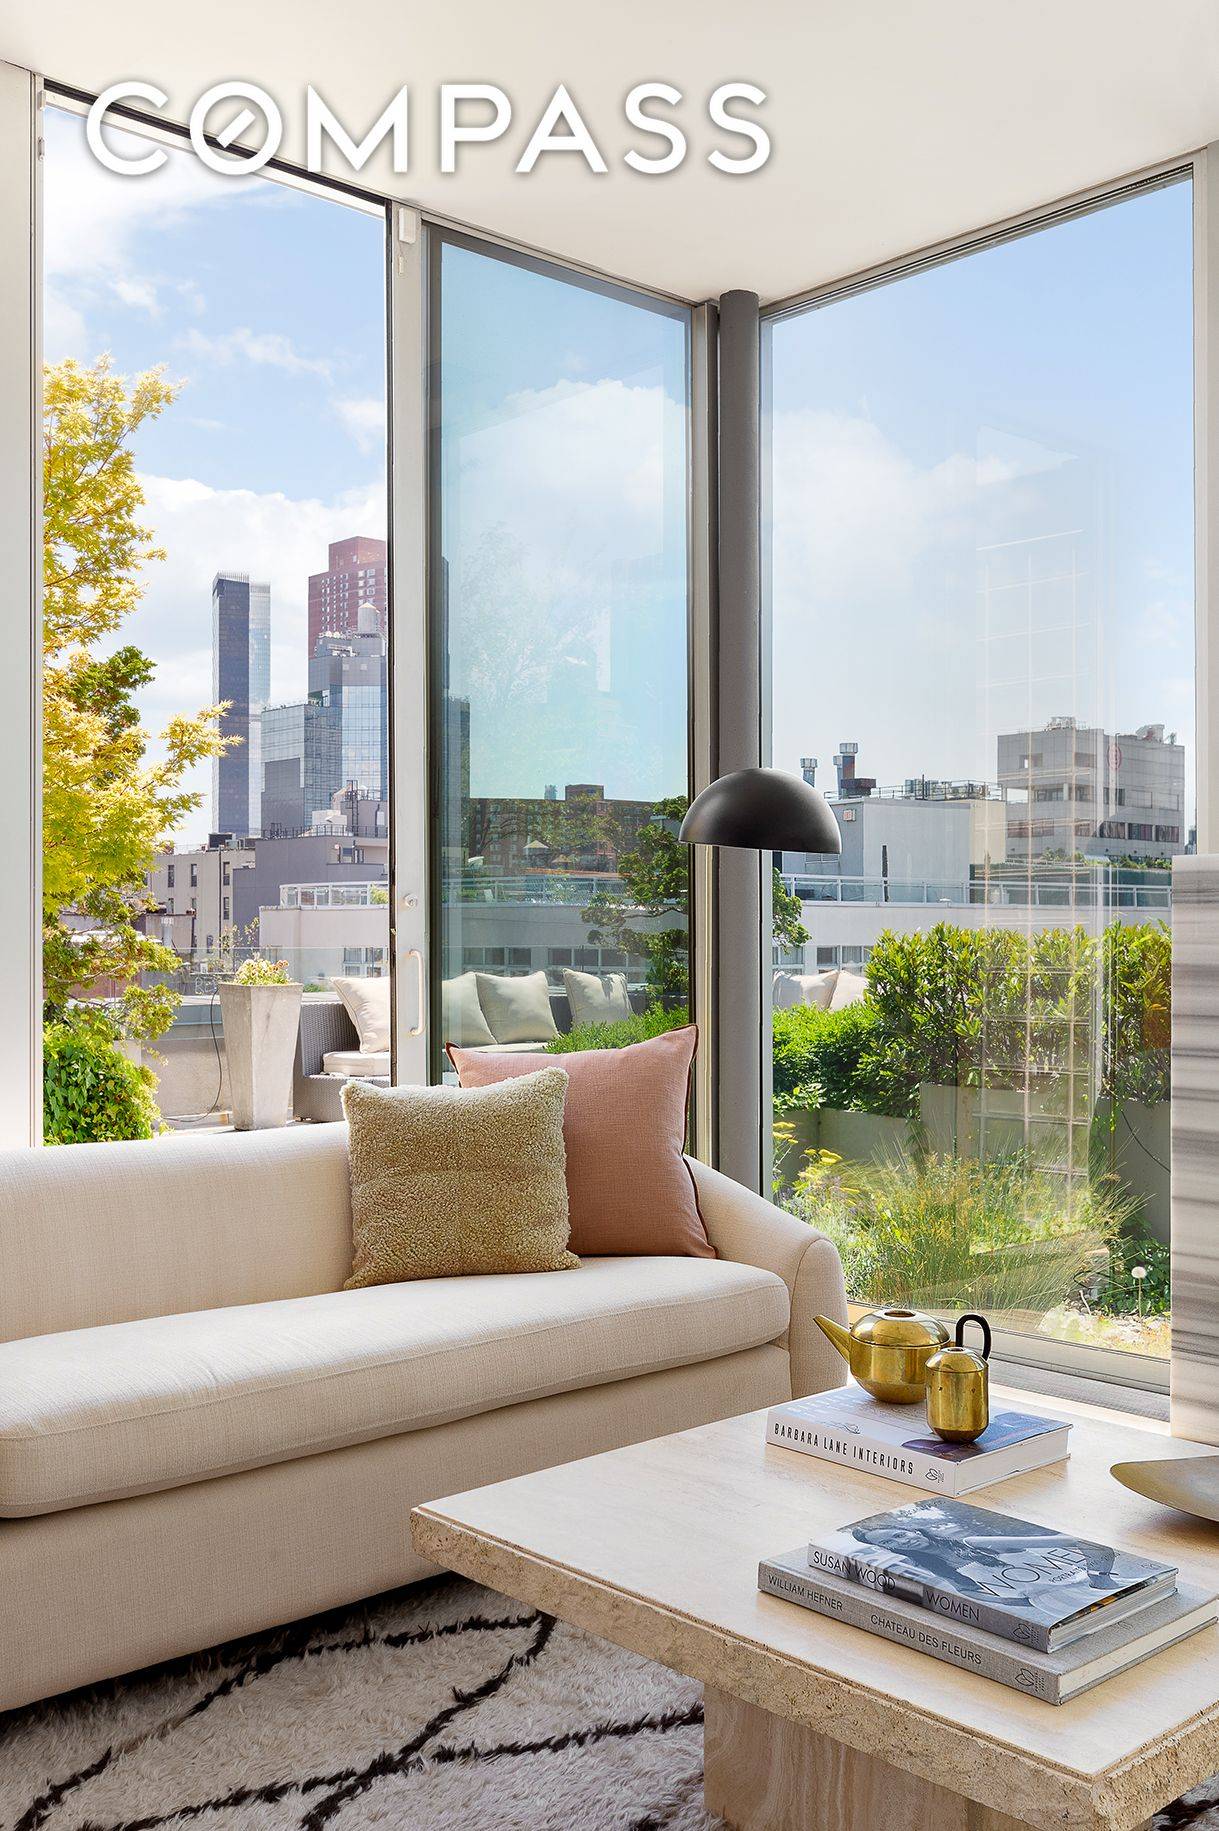 Penthouse South at 136 Baxter Street is an unrivaled offering nestled at the crossroads of Soho, Nolita and Chinatown.